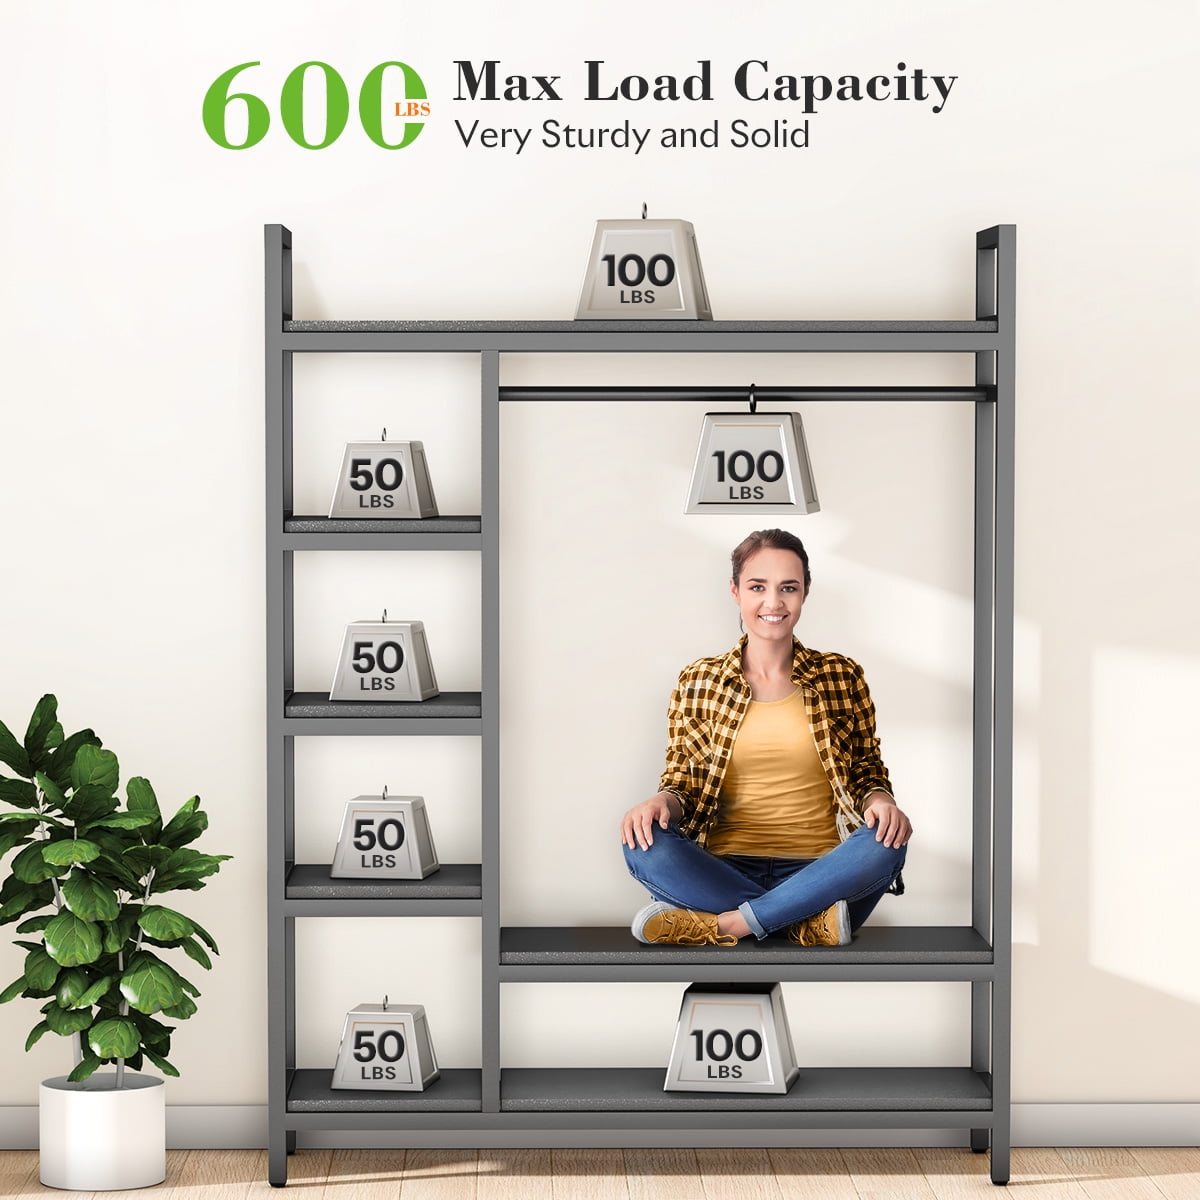 HOKEEPER 650lbs Capacity Free Standing Closet Organizer with 6 Metal Shelves and Coat Rack Heavy Duty Clothing Rack for Hanging Clothes Closet